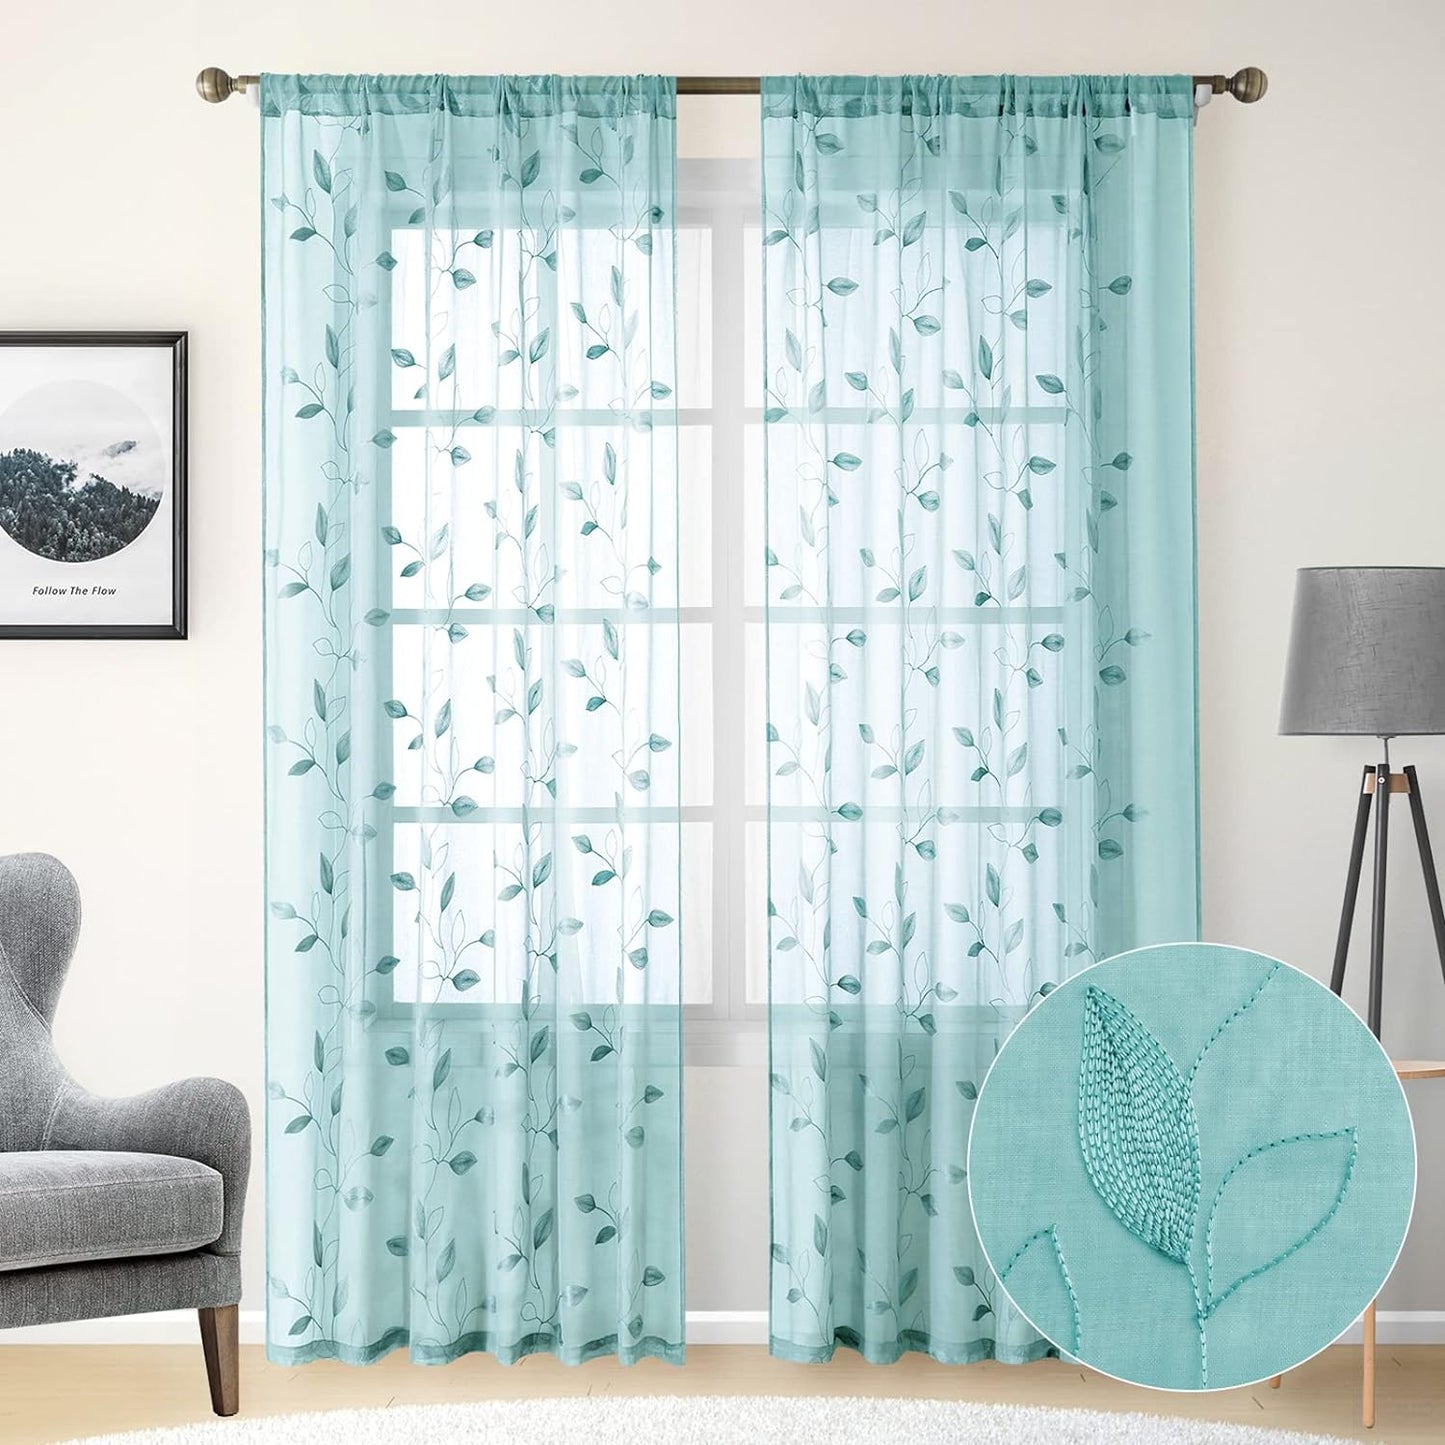 HOMEIDEAS Sage Green Sheer Curtains 52 X 63 Inches Length 2 Panels Embroidered Leaf Pattern Pocket Faux Linen Floral Semi Sheer Voile Window Curtains/Drapes for Bedroom Living Room  HOMEIDEAS 5-Turquoise W52" X L96" 